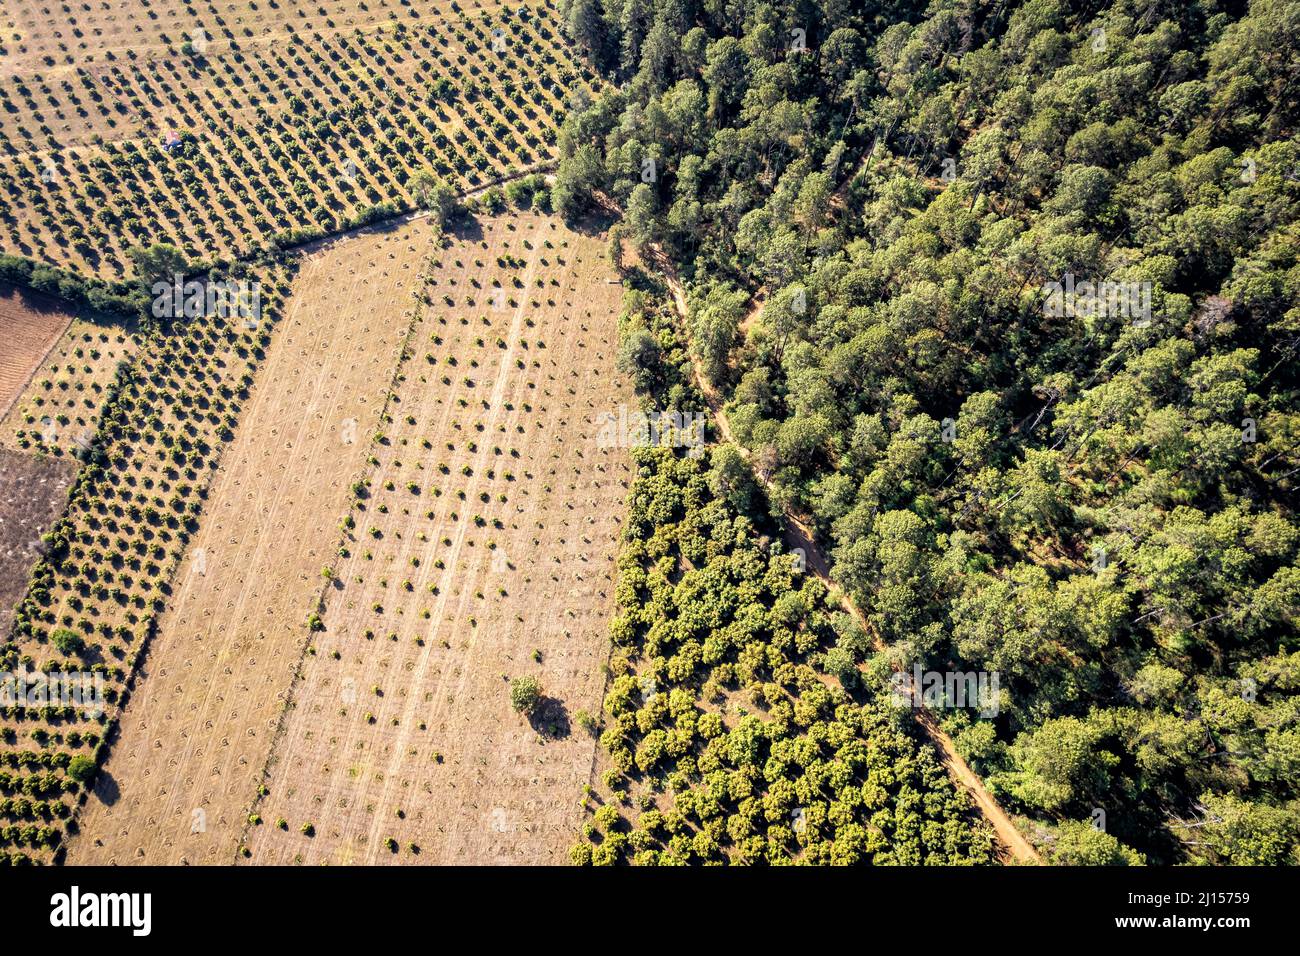 Deciduous and pine tree forest infringed upon by recently planted avocado orchards, Michoacan, Mexico. Stock Photo